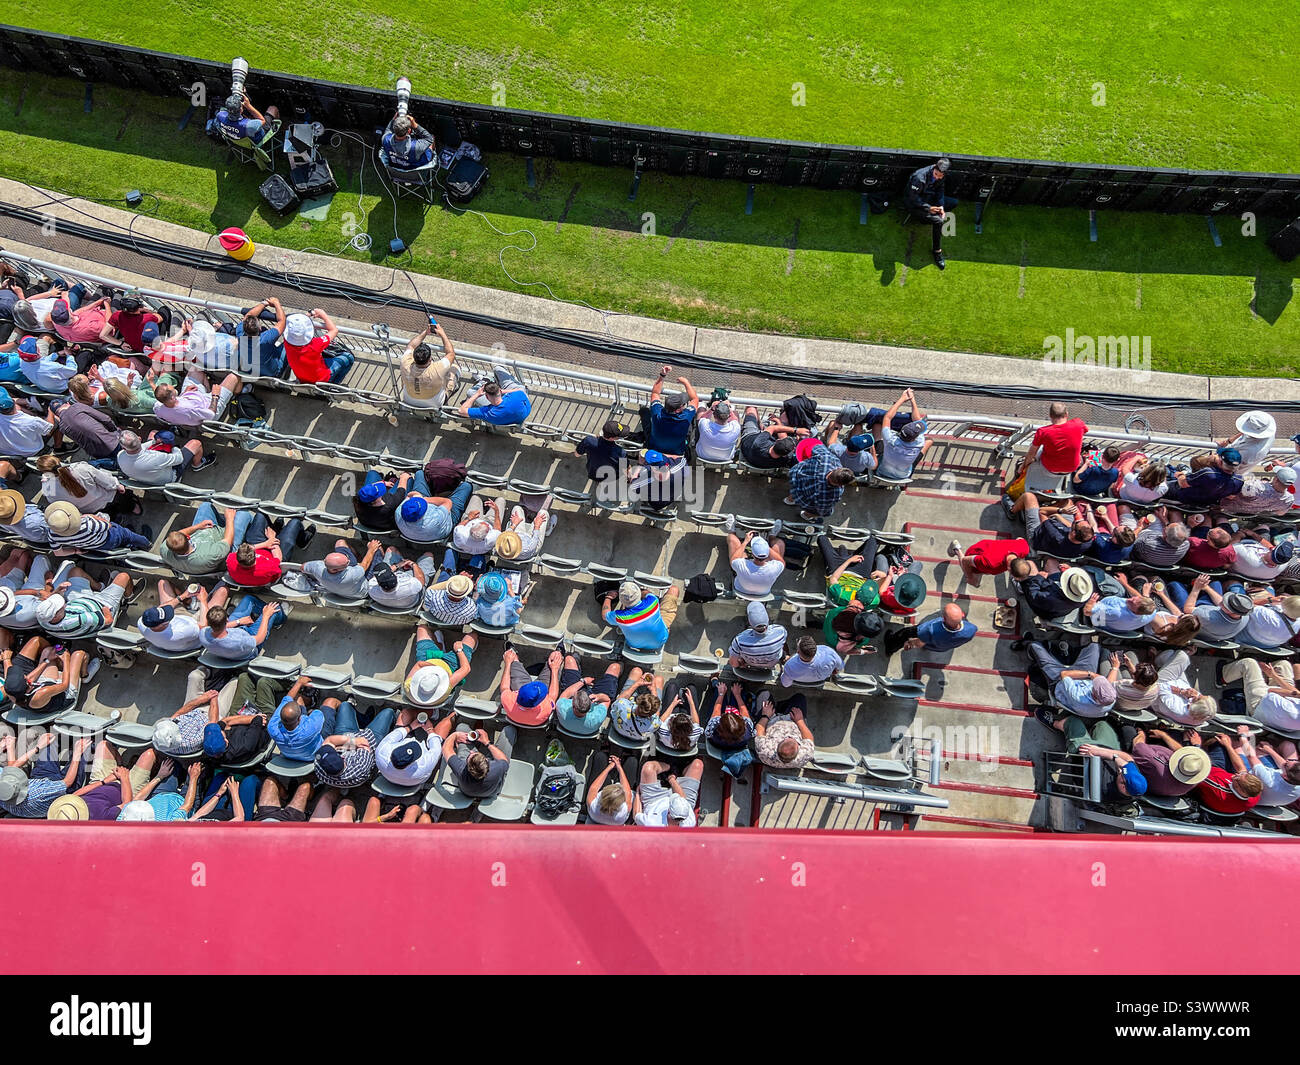 Crowd of spectators seated at Lancashire cricket club watching cricket Stock Photo